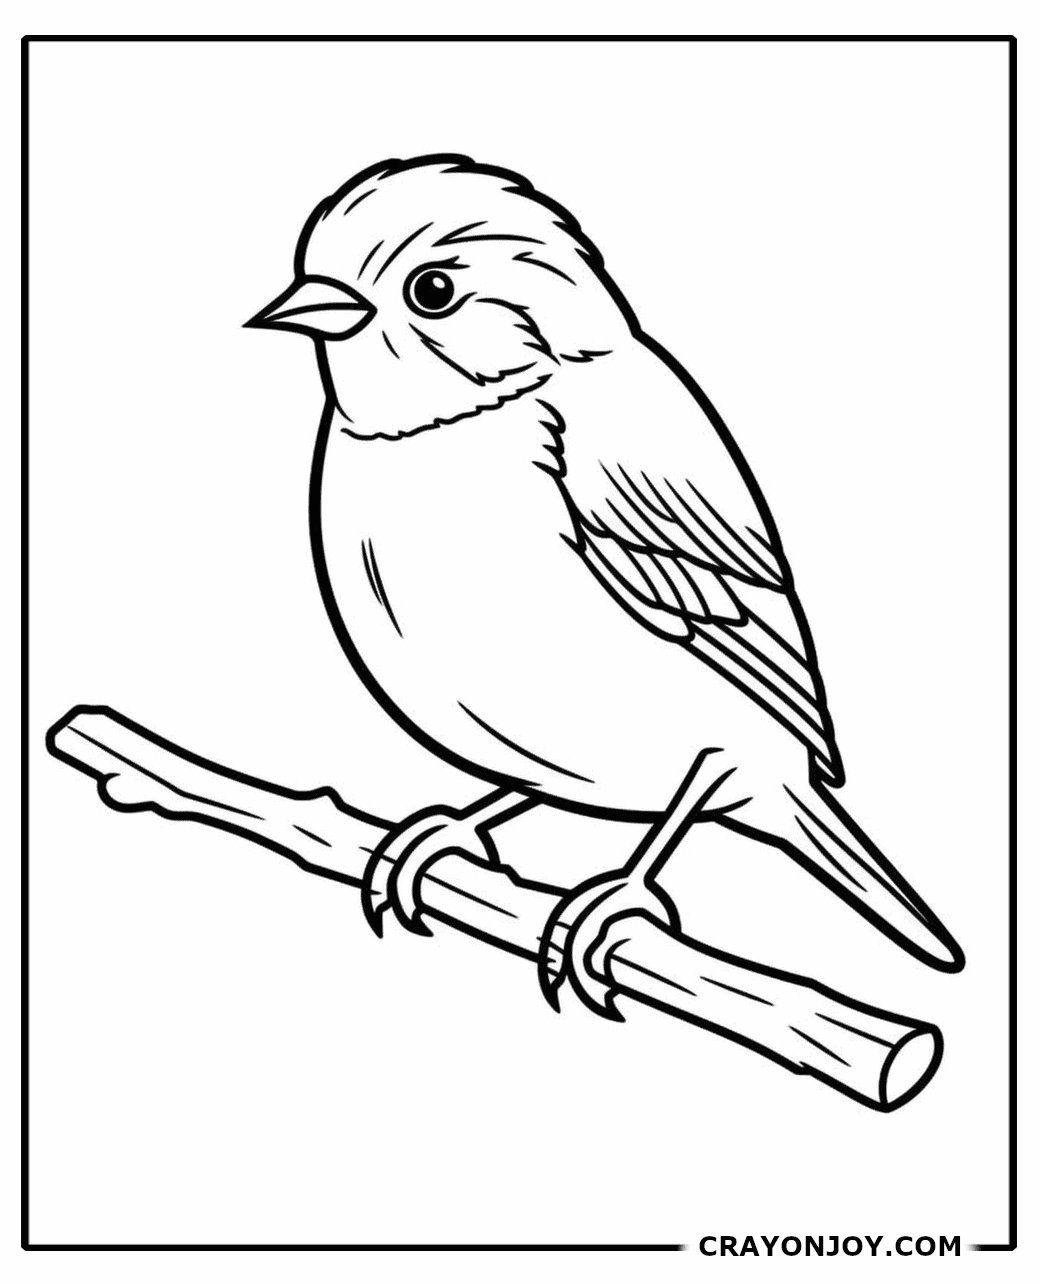 Free Printable Canary Coloring Pages for Kids & Adults